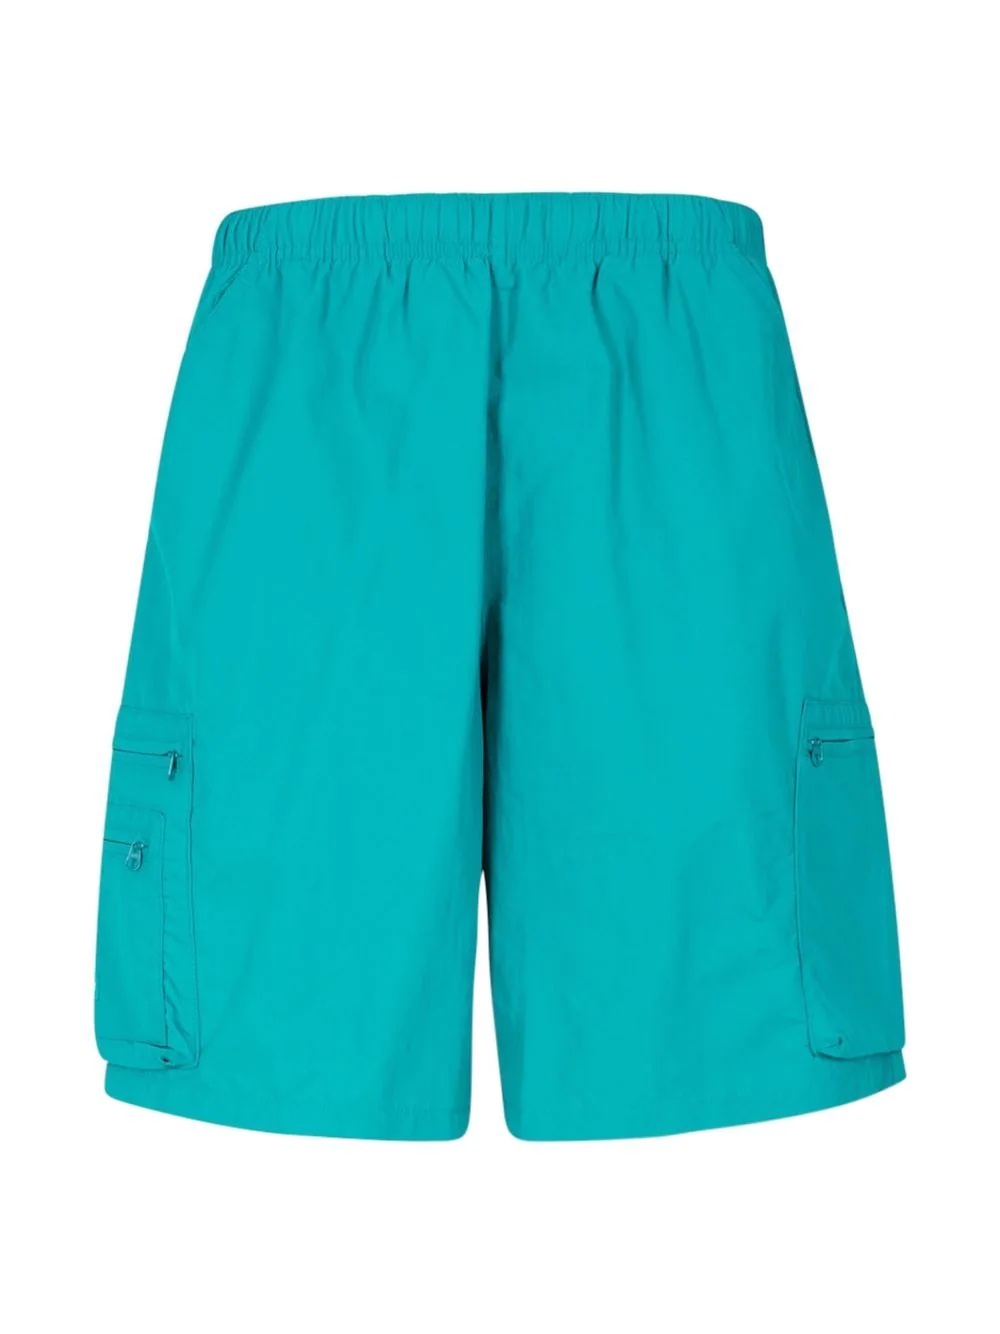 cargo Water shorts "SS21" - 2